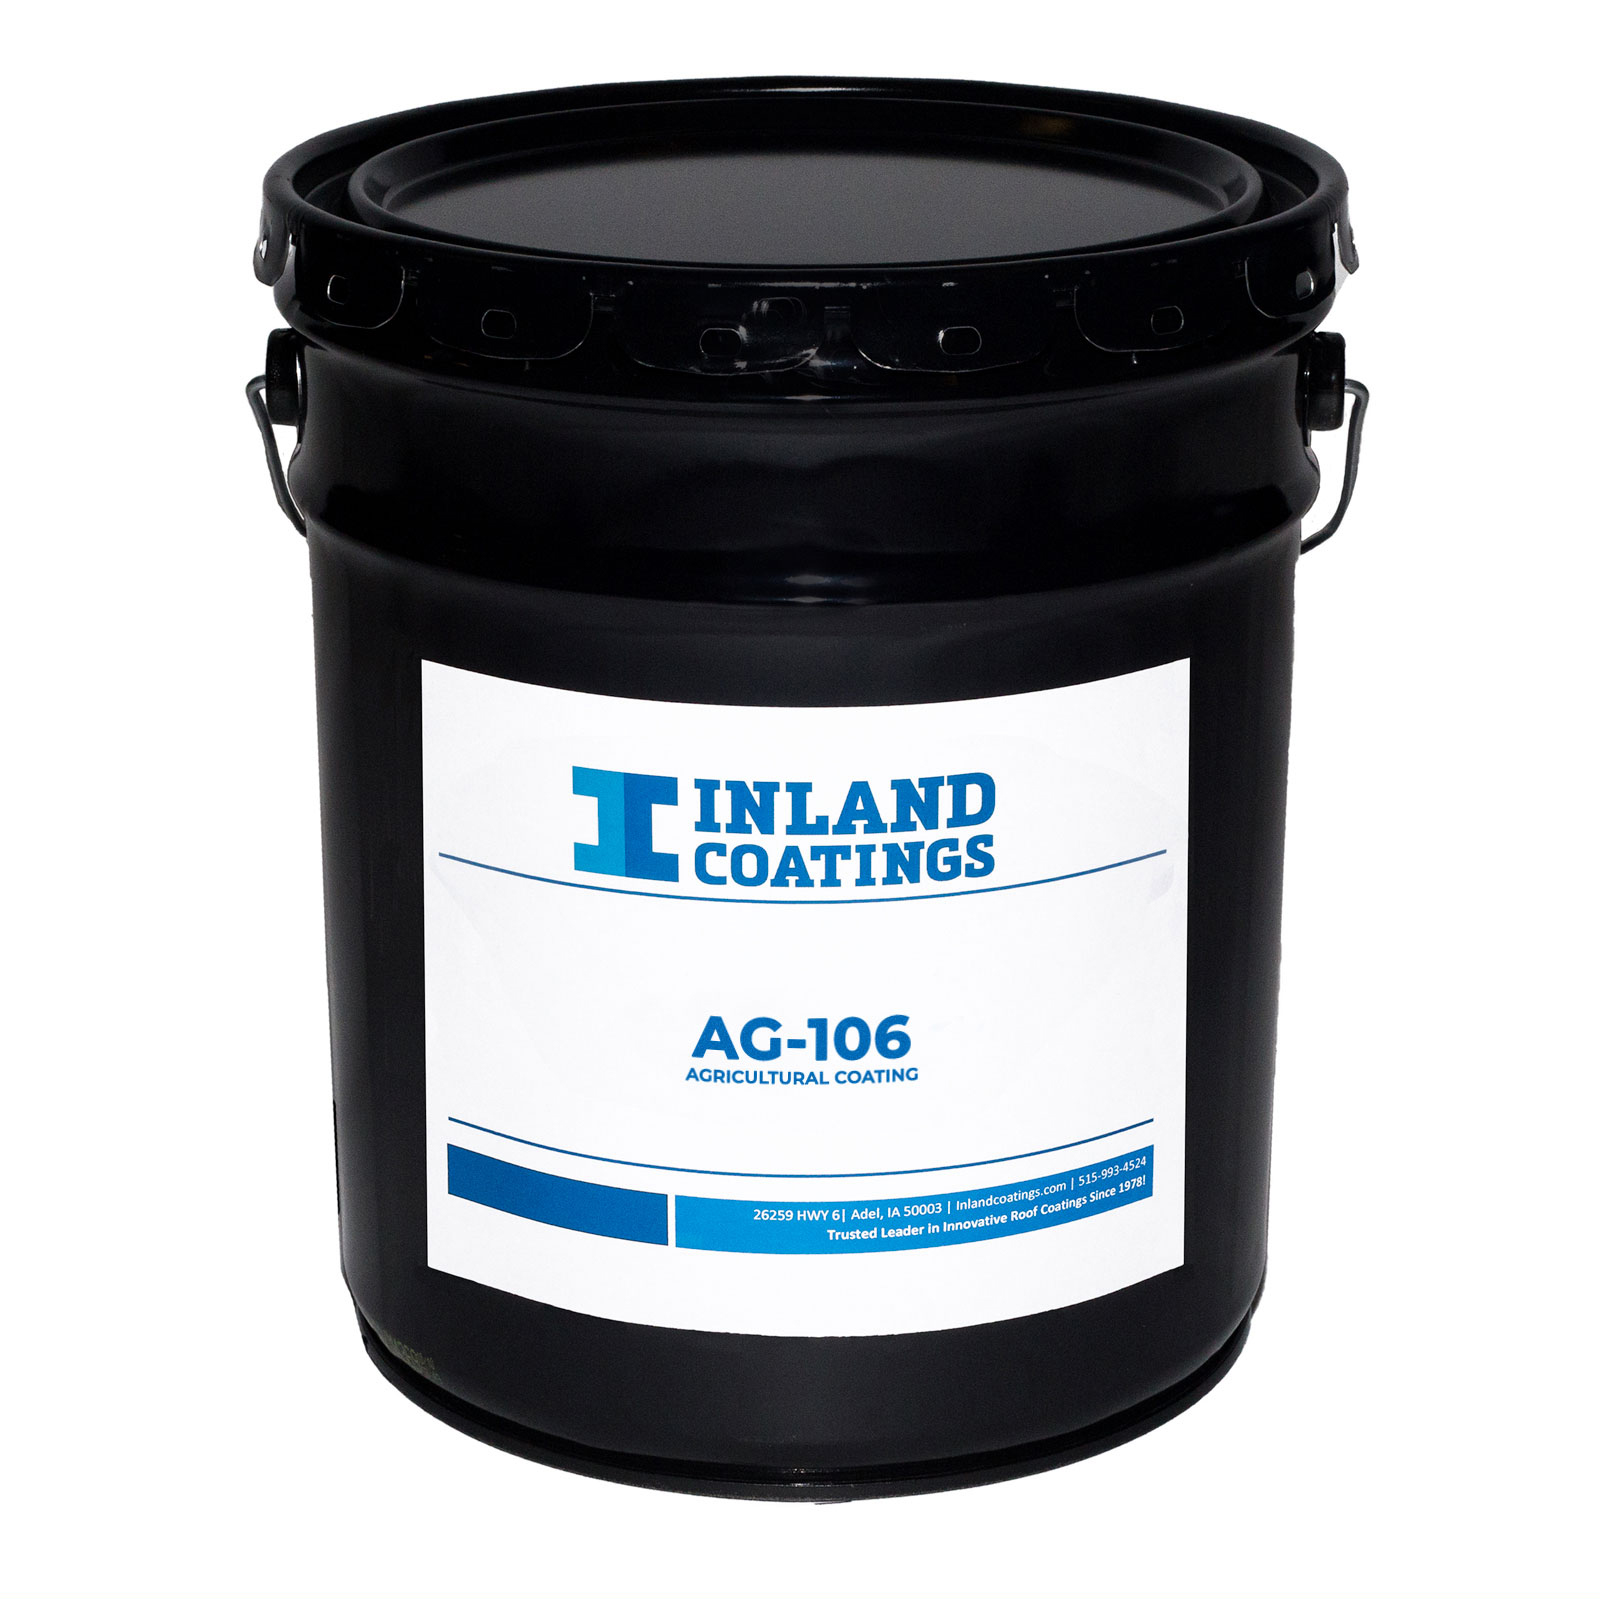 A bucket of Inland's AG-106 Agricultural Coating